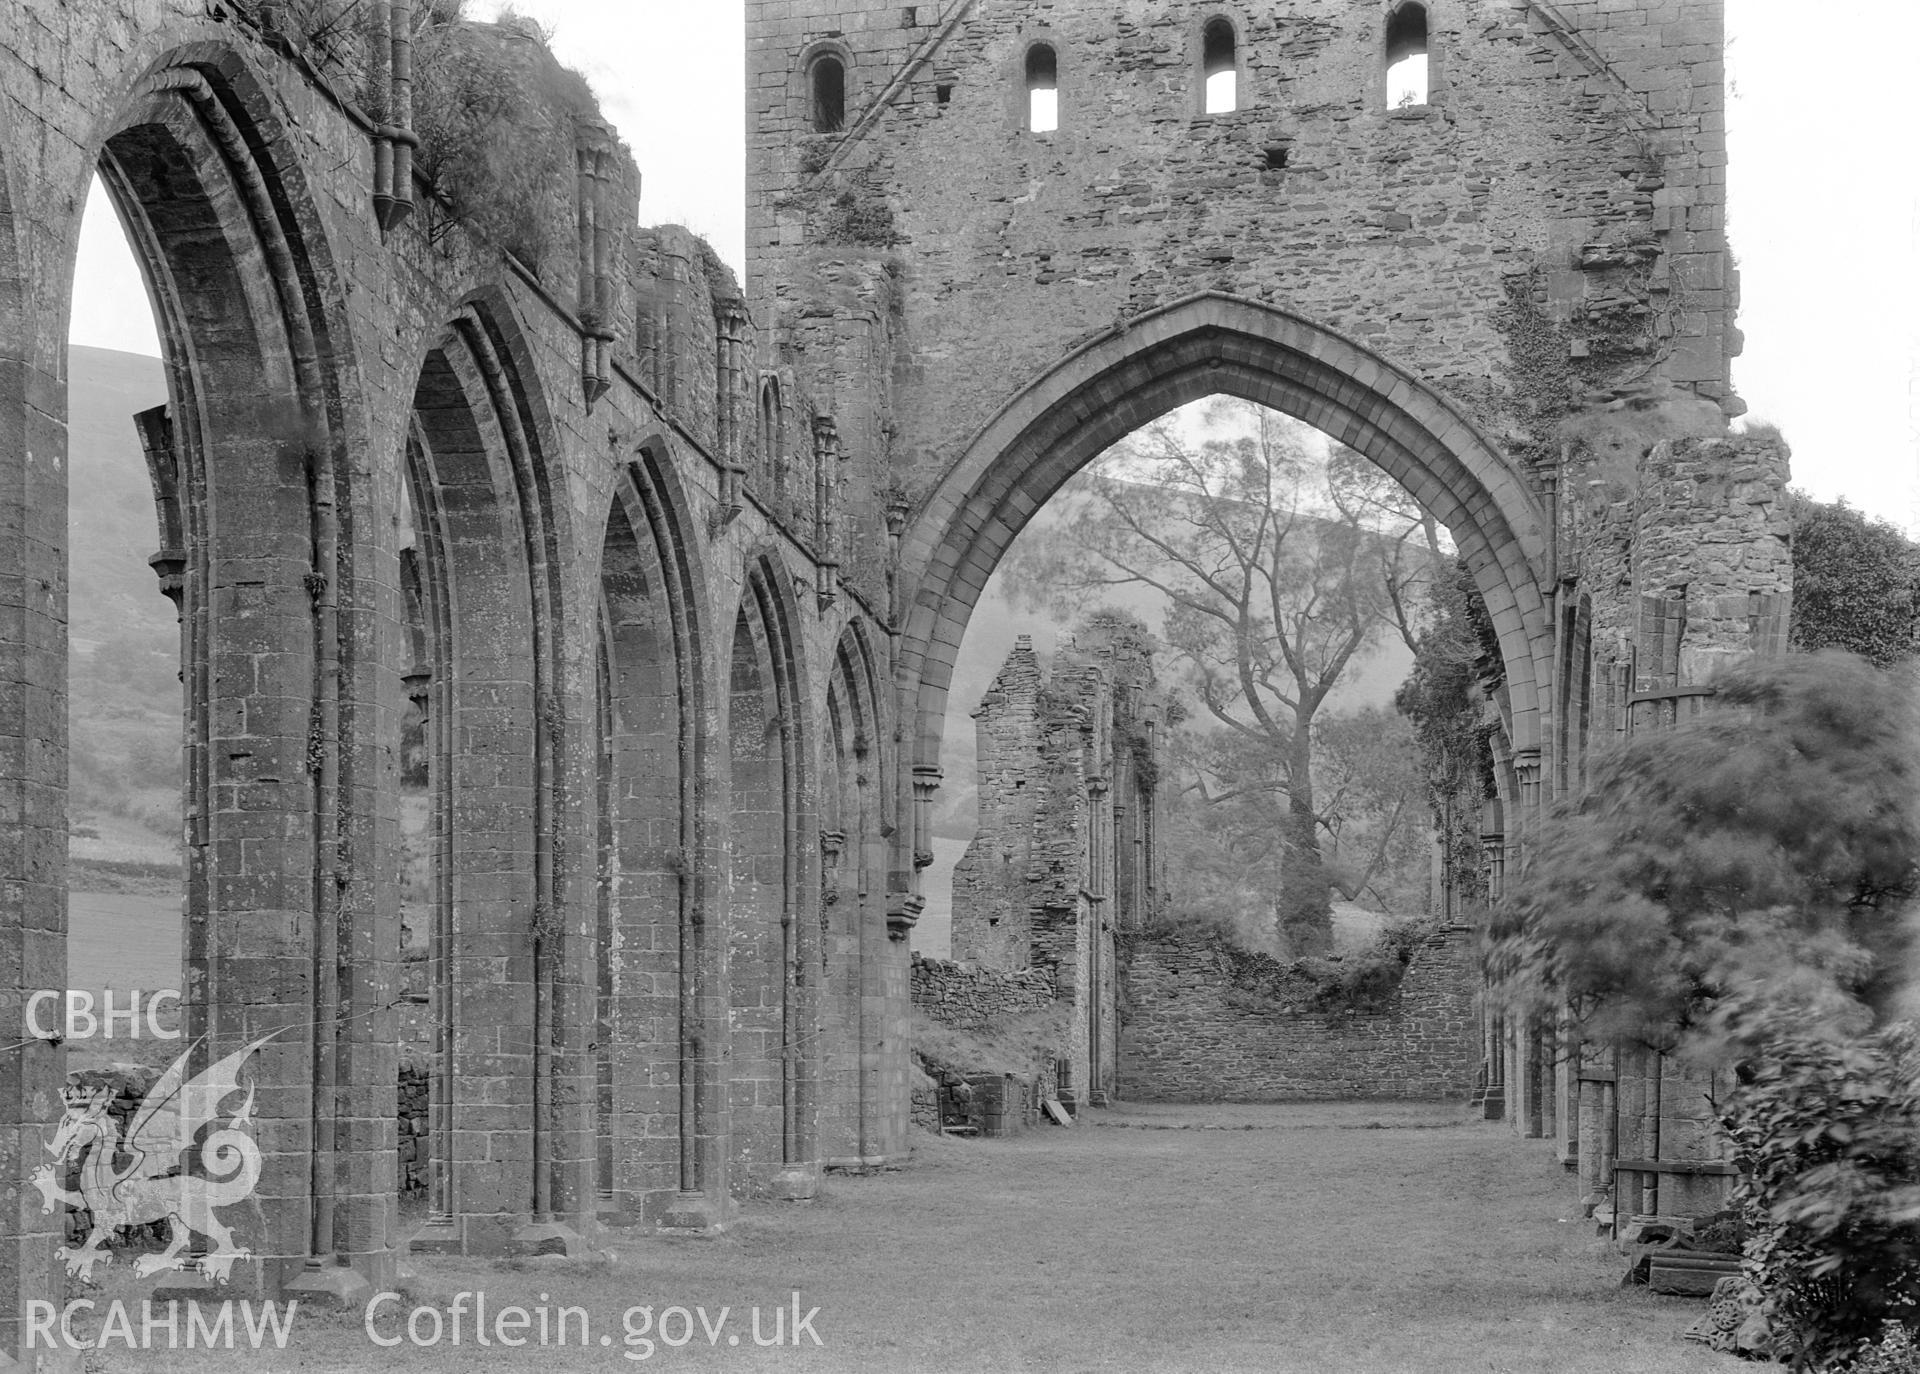 View of the nave of Llanthony Abbey.